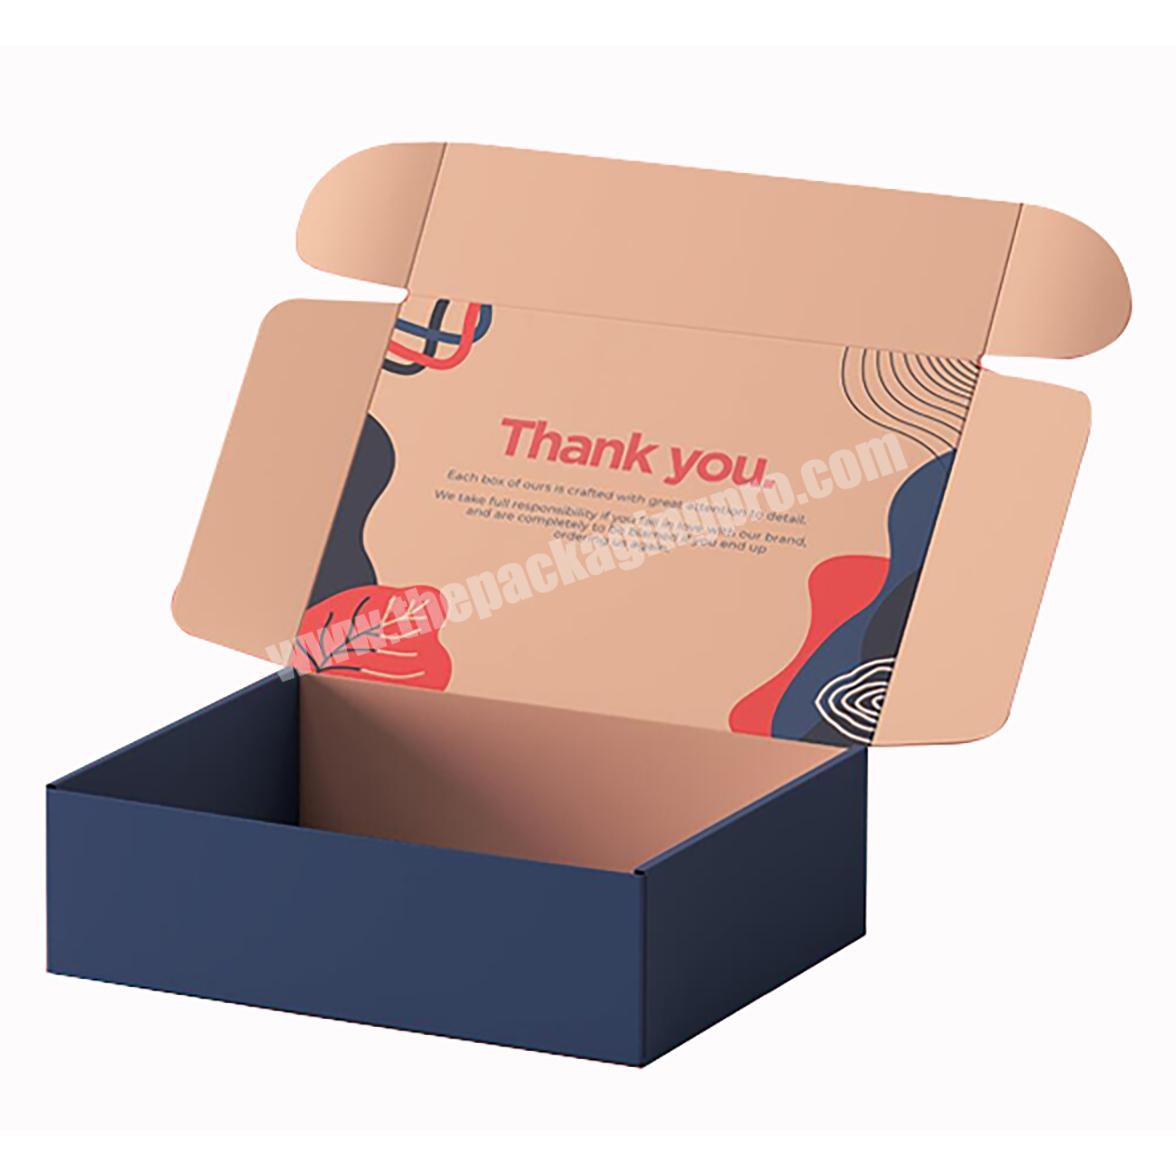 Custom Printed Boxes Logo Recycled Holographic Kraft Corrugated with Insert Candle Flower Paper Mailer Box Gift Packaging 500pcs